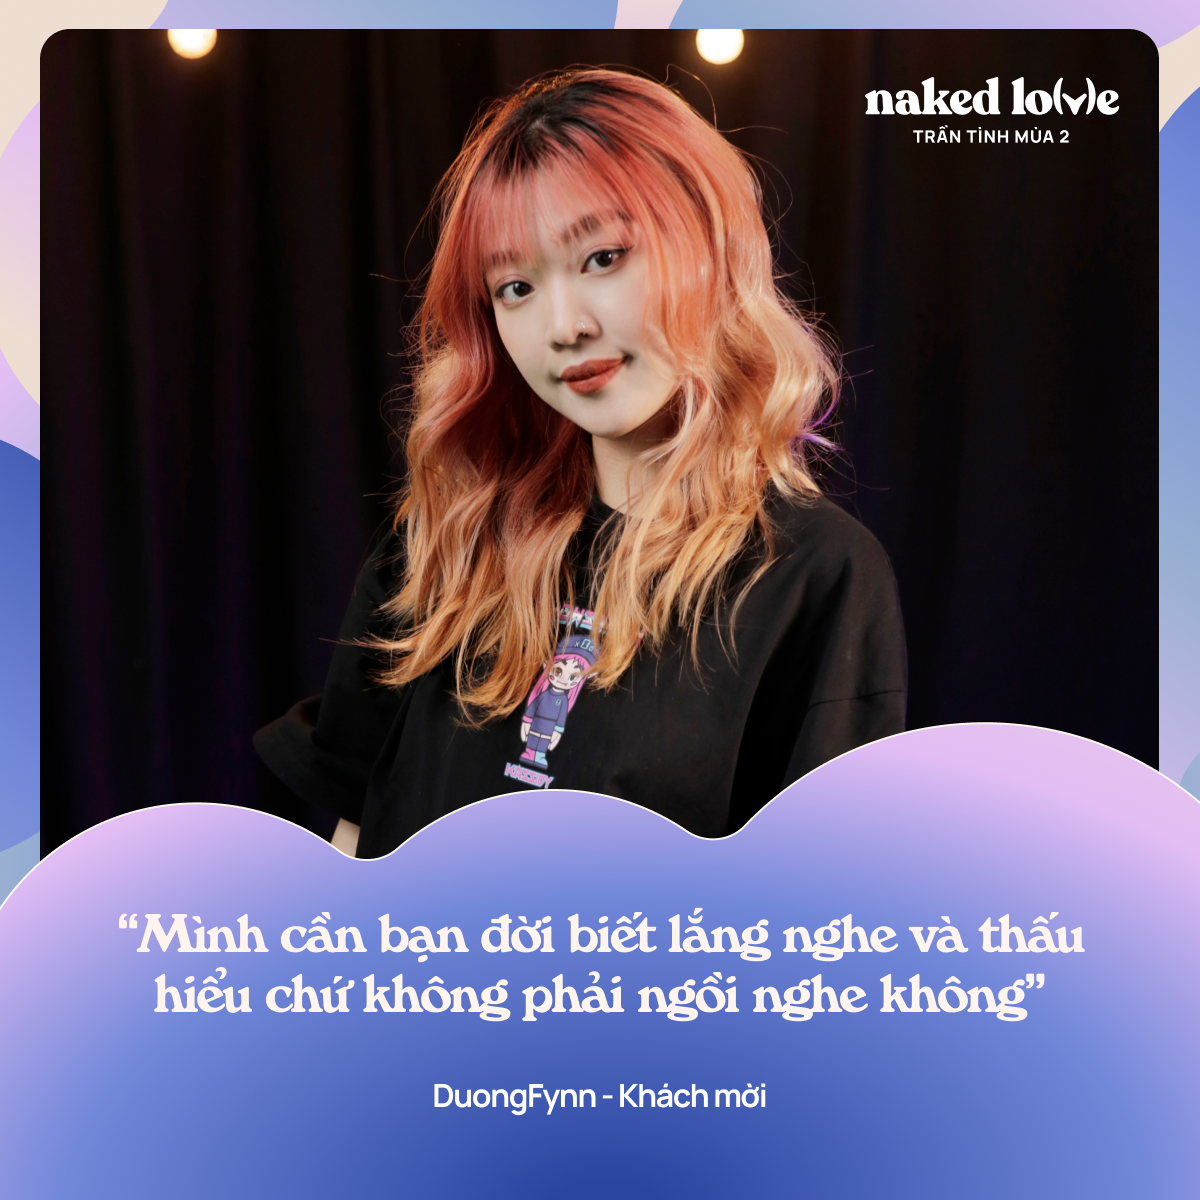 DuongFynn chooses a life partner who is educated, Quynh Luong responds sharply: 